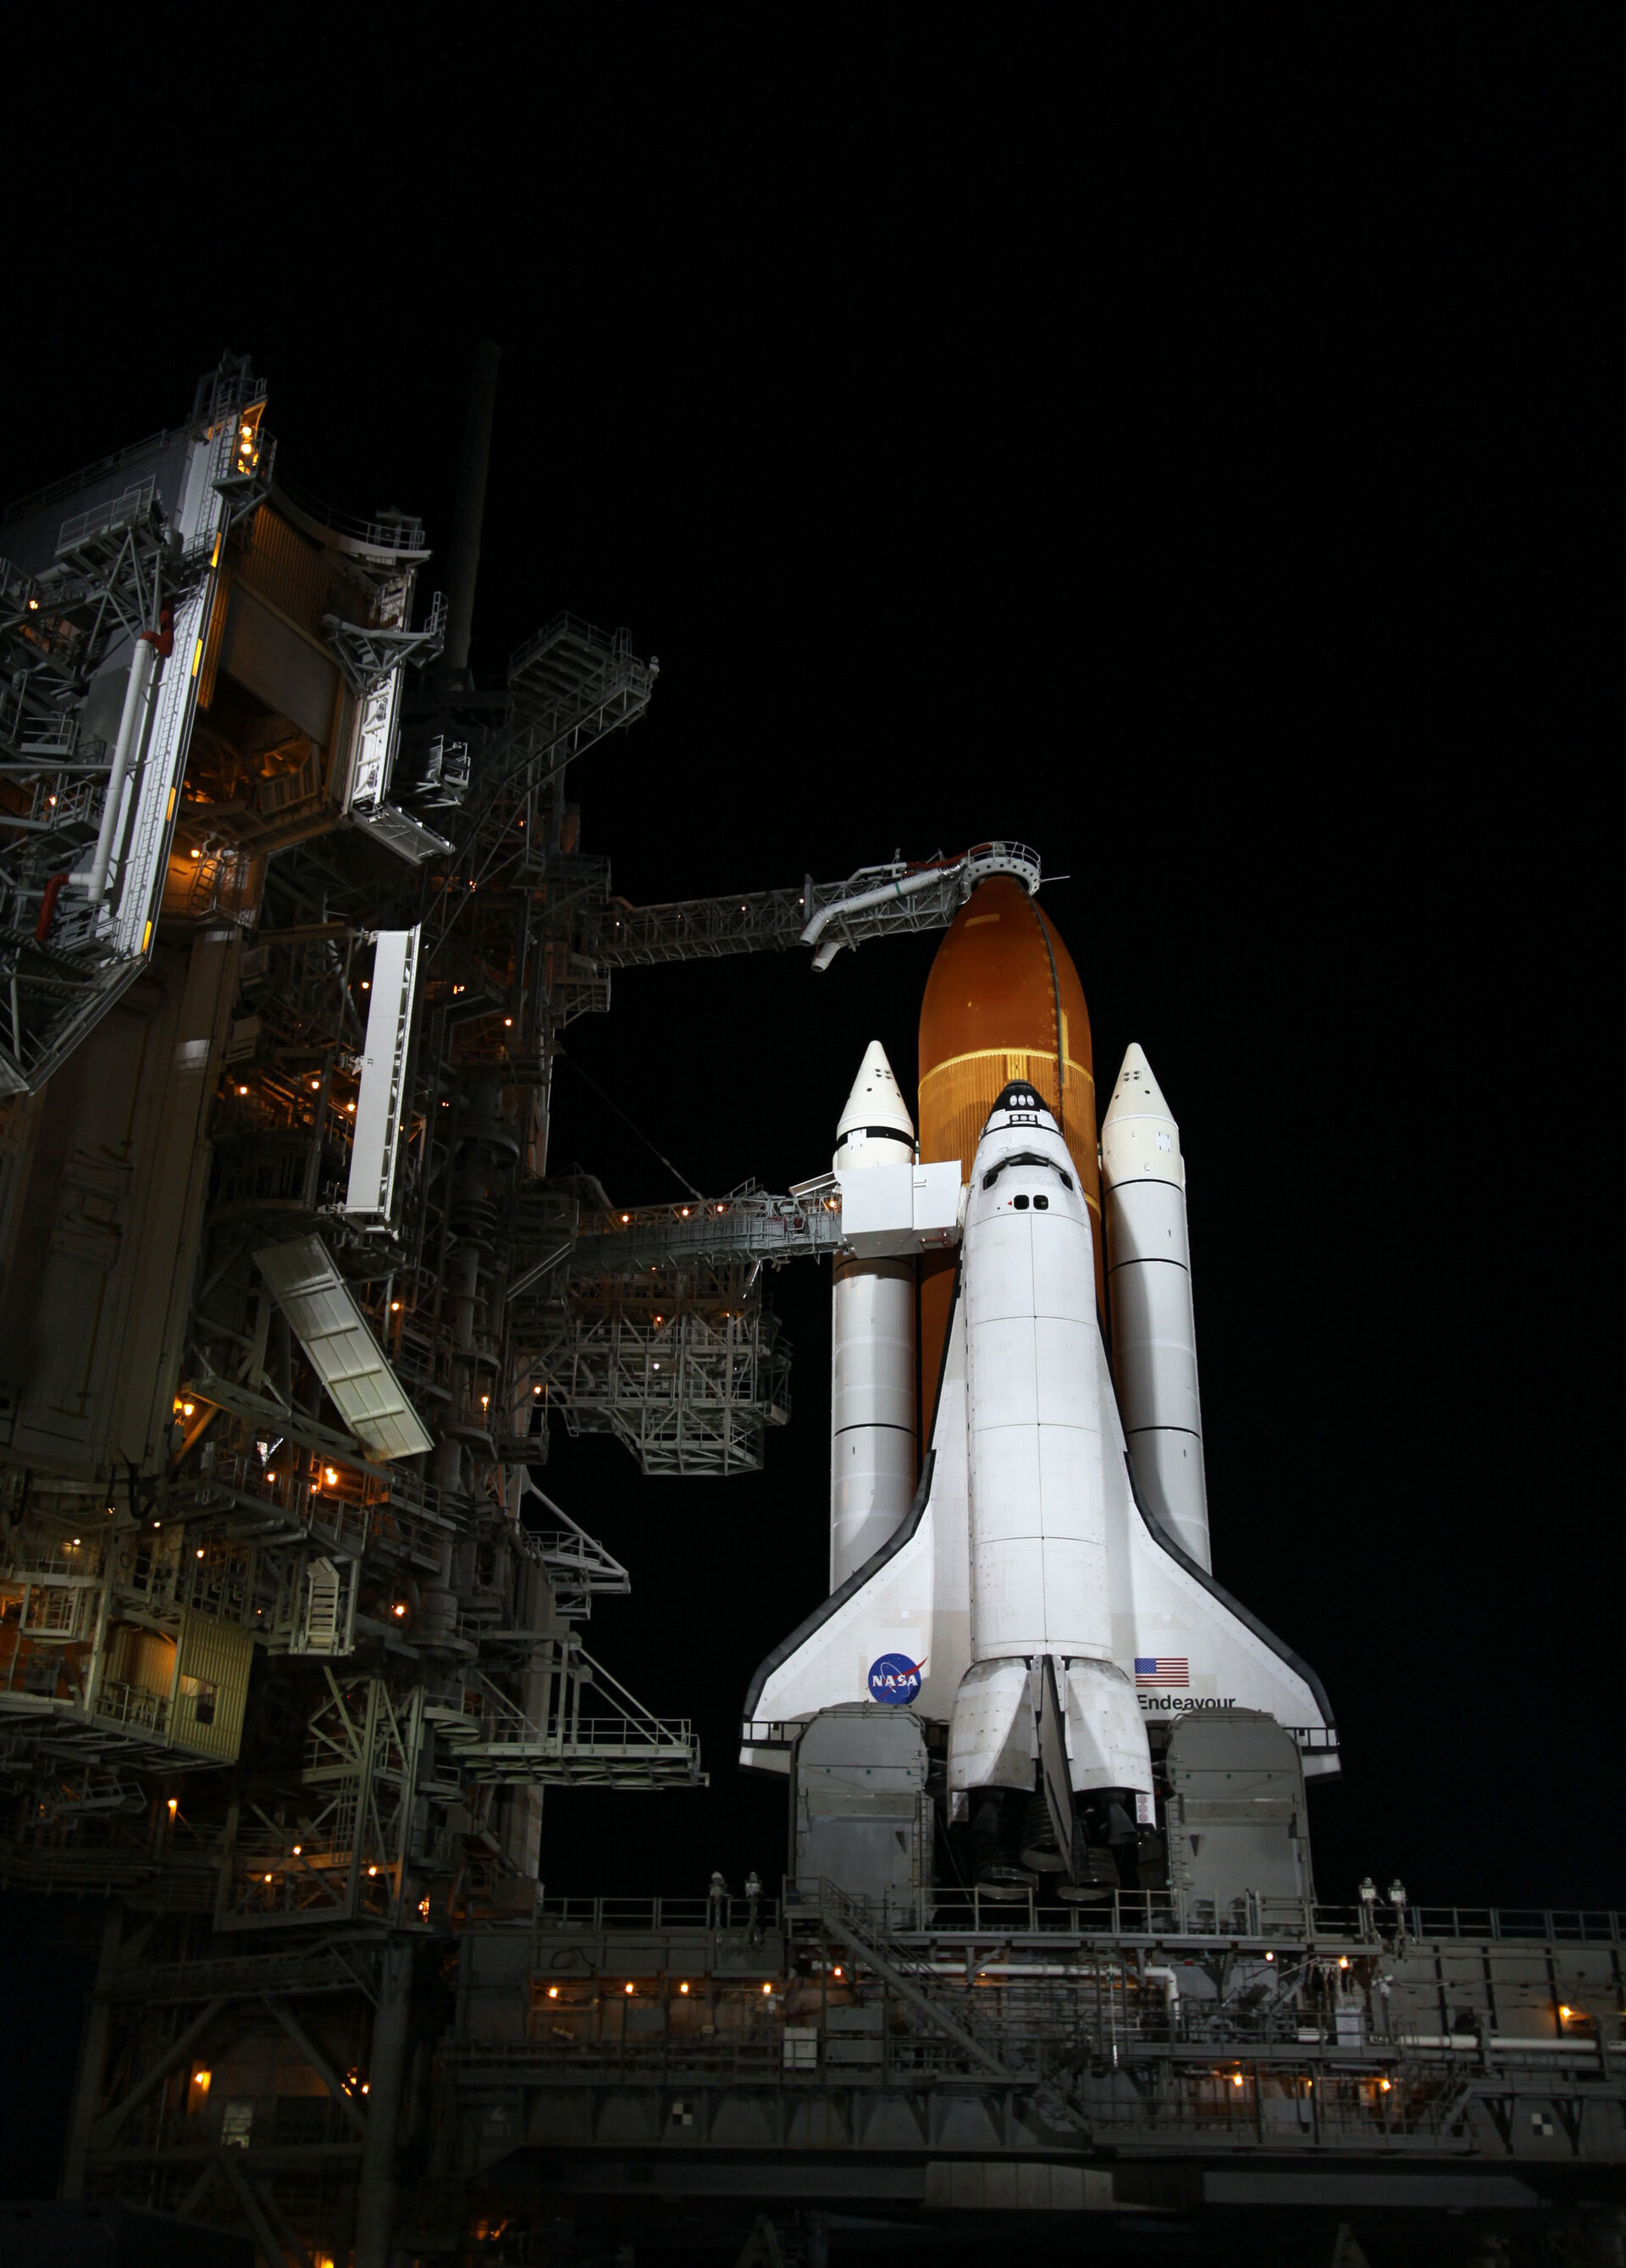 Endeavour illuminated by bright xenon lights